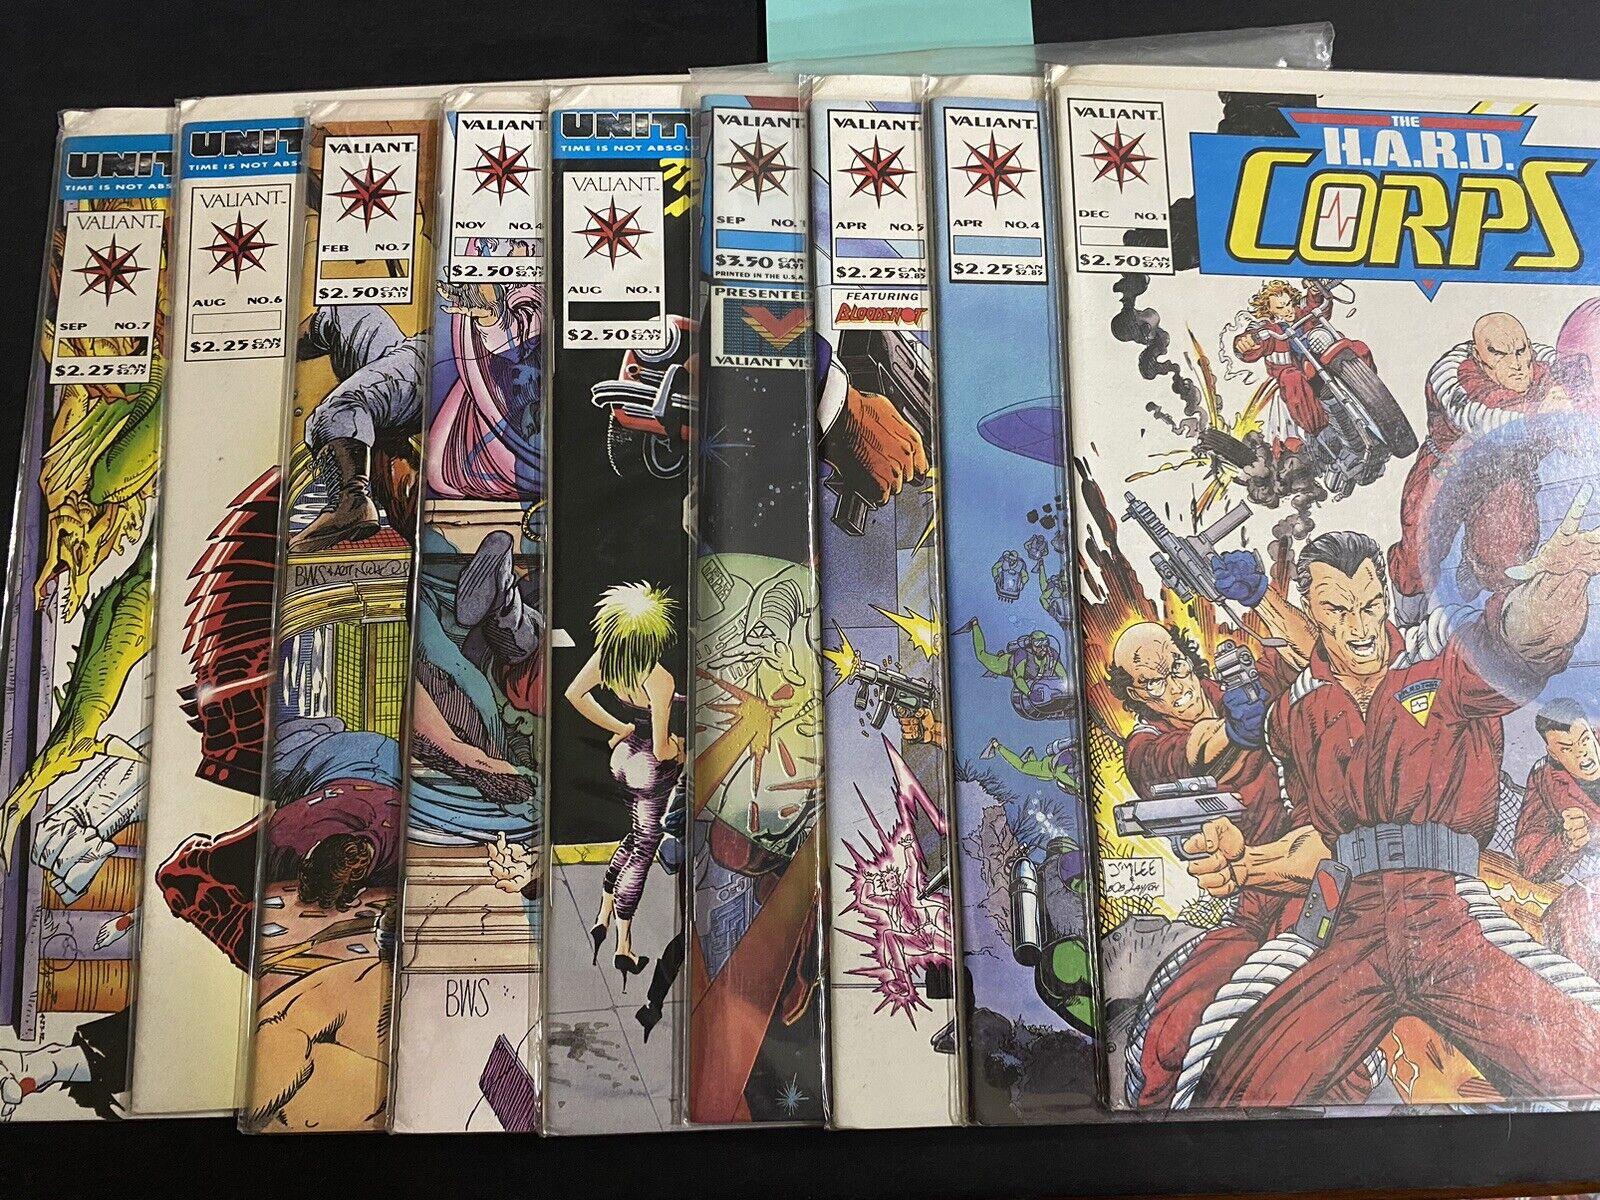 Lot of 9 Valiant Comics W/ Hard CORPS 1, Archer & Armstrong 1 & Psi-Lords 1